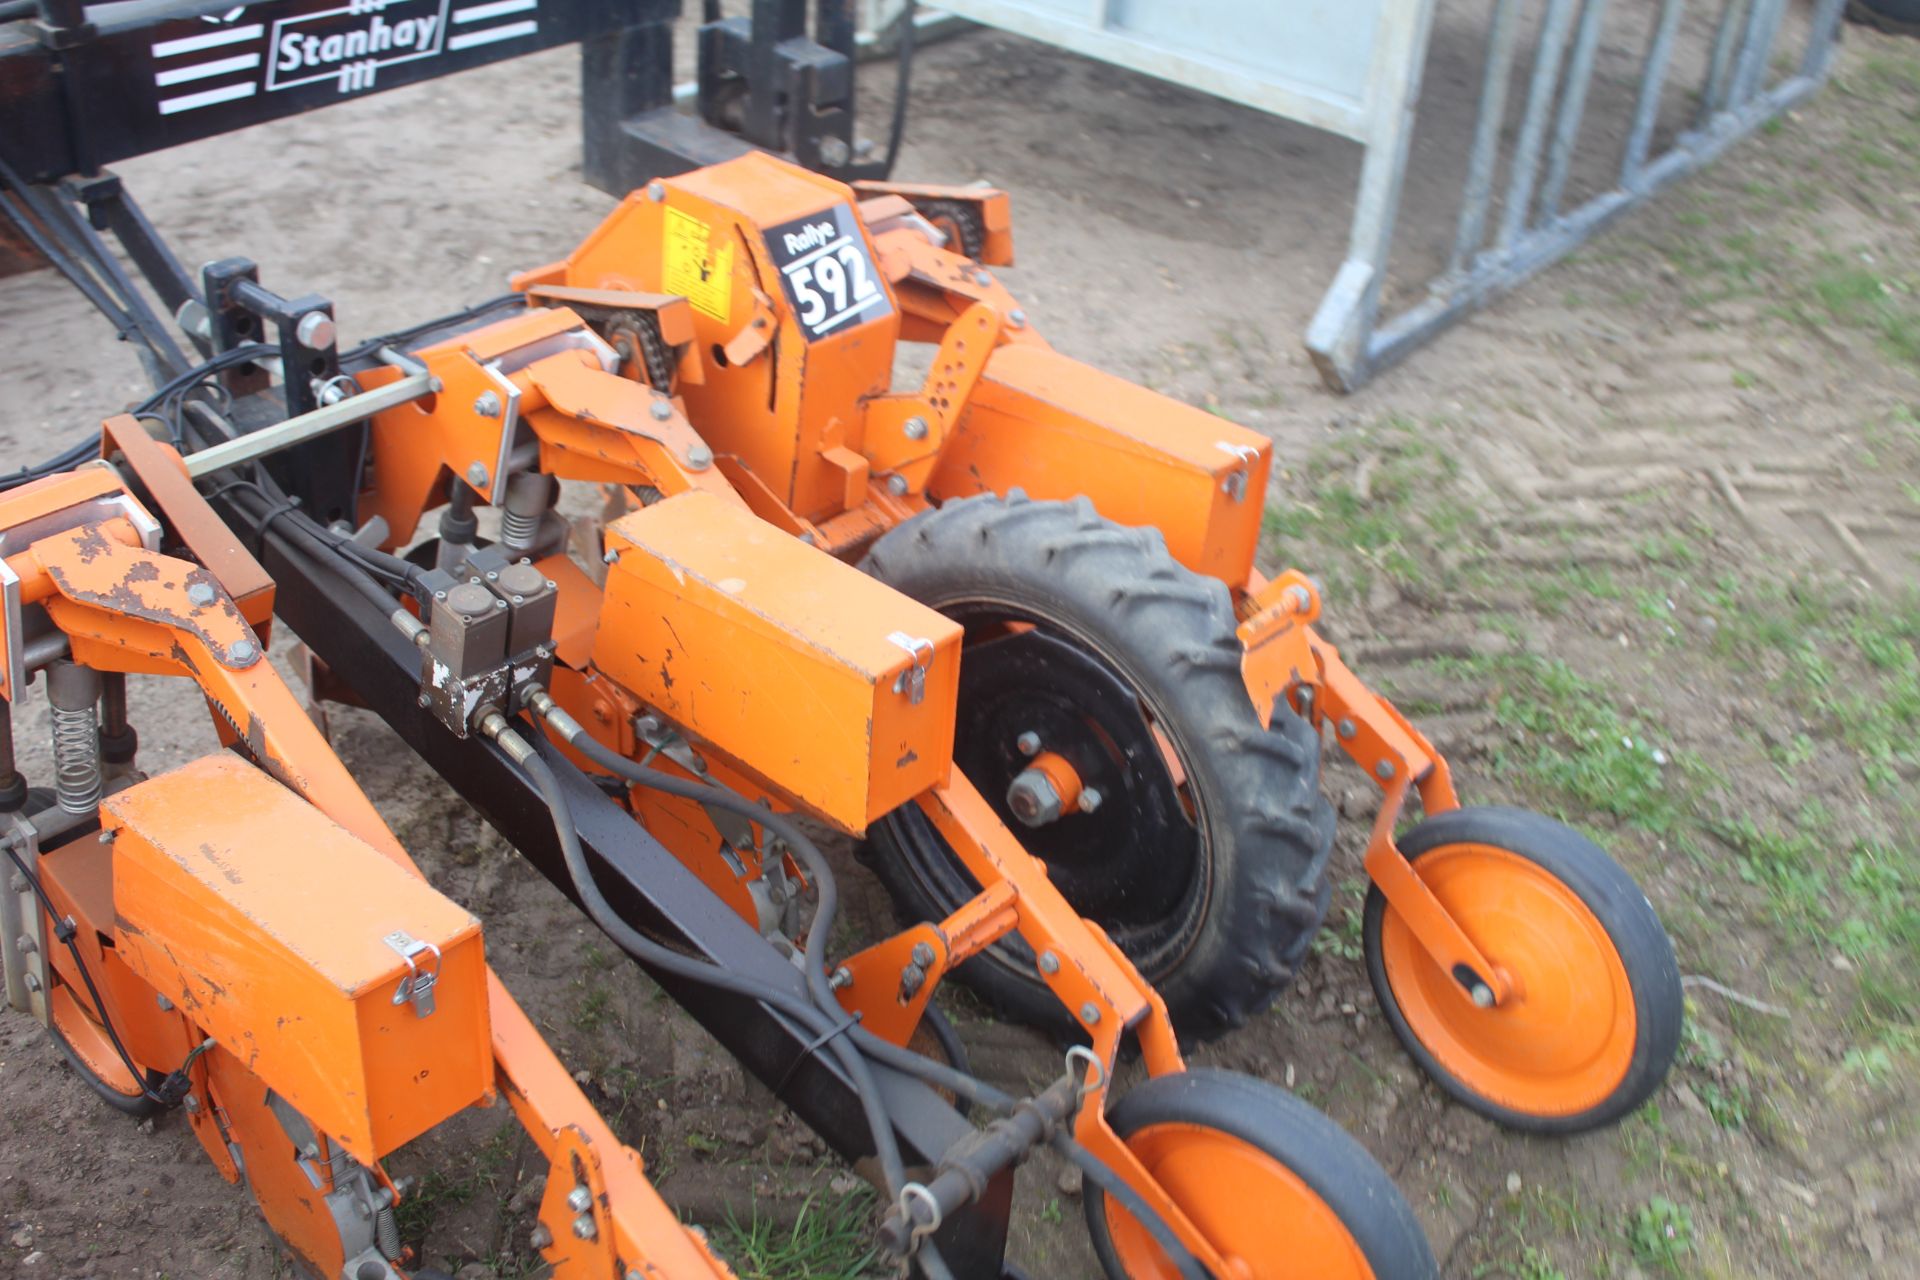 Stanhay Rallye 592 hdraulic folding 12 row beet drill. With bout markers. V - Image 20 of 28